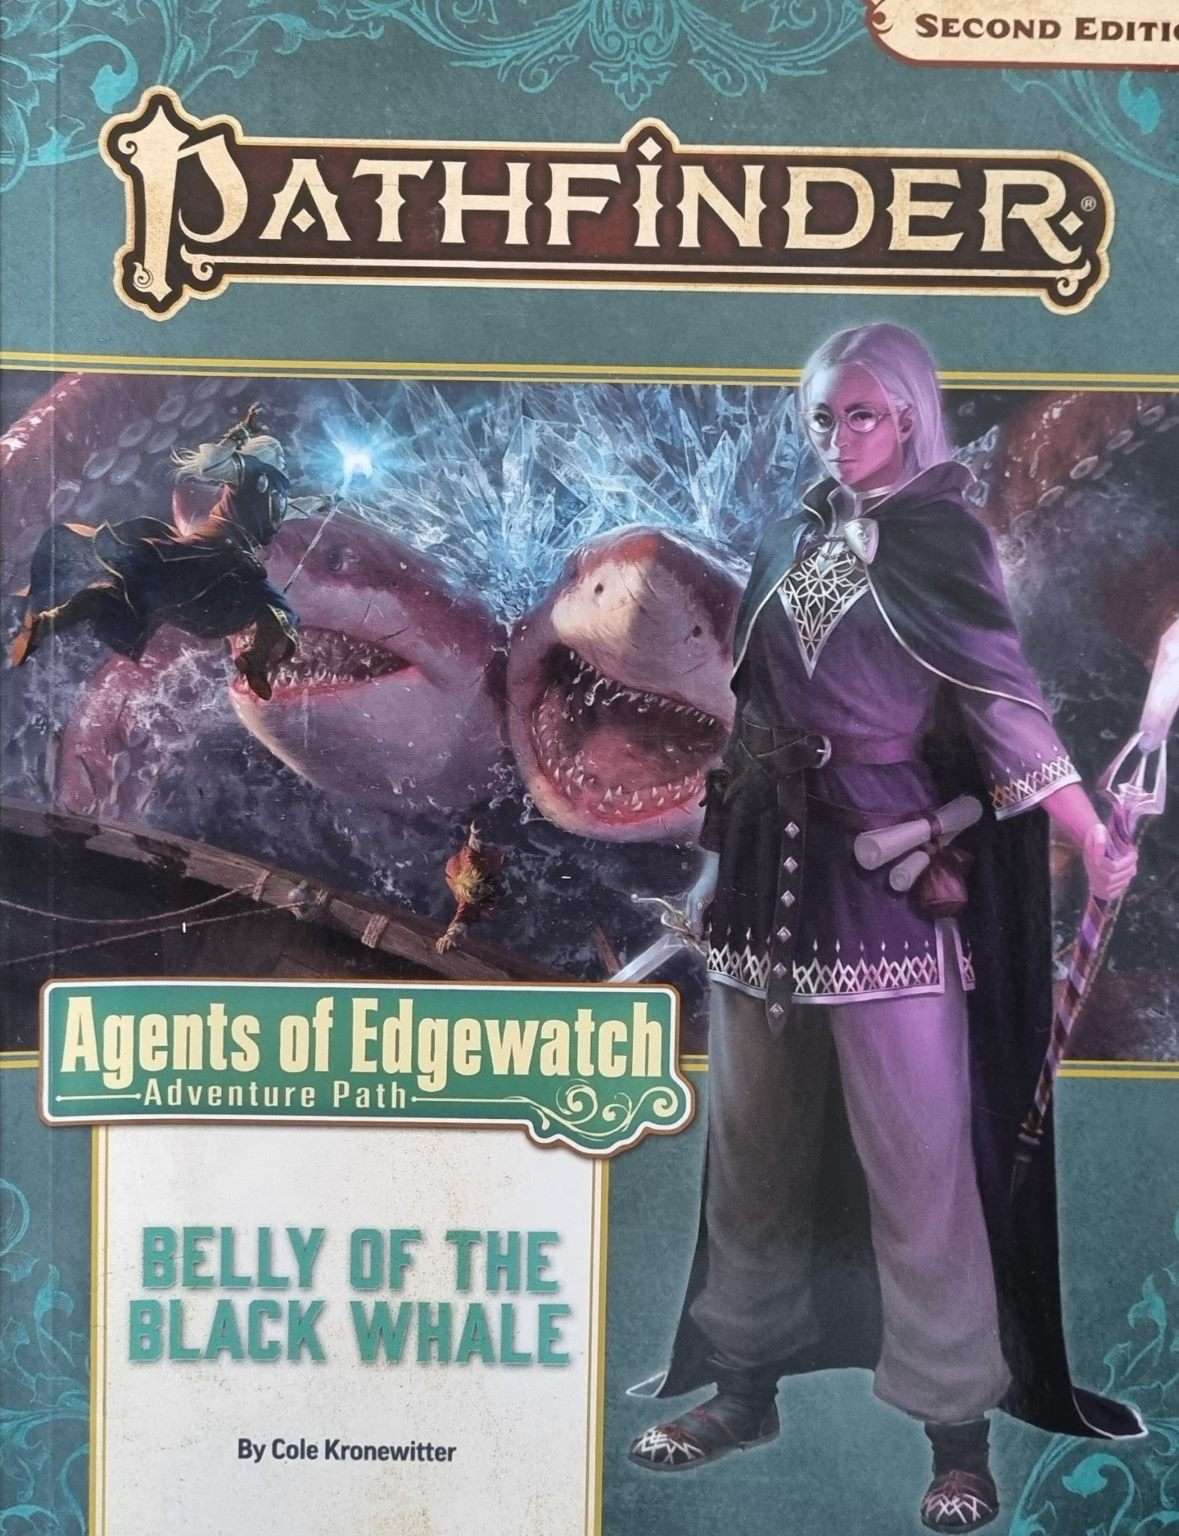 Pathfinder: Agents of Edgewatch - Belly of the Black Whale - 2nd Edition 2e